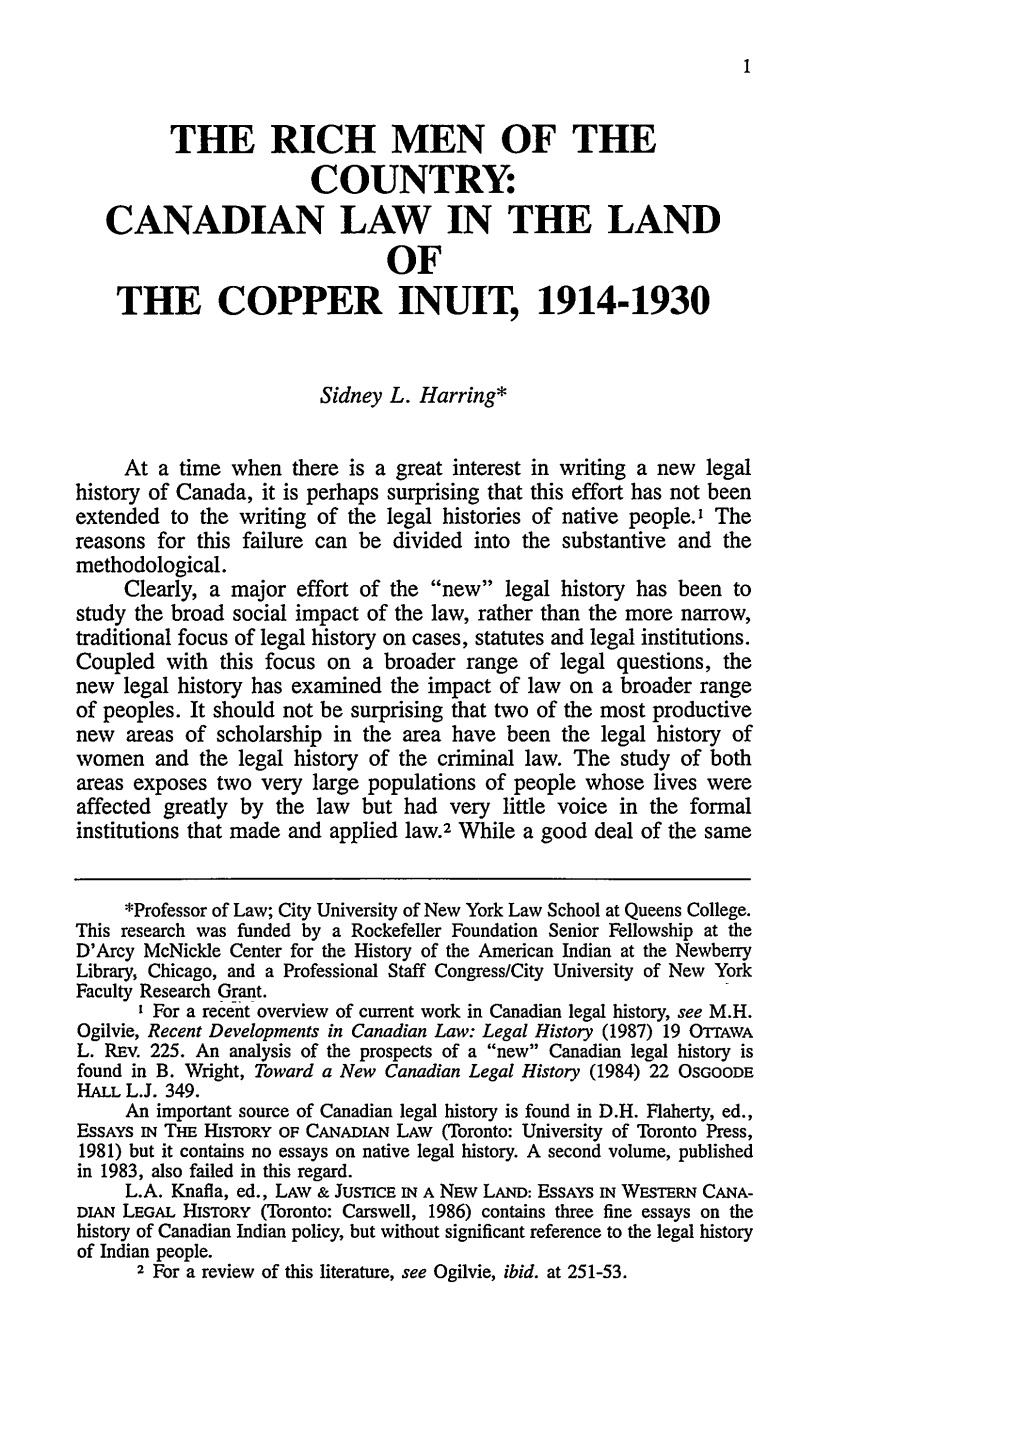 Canadian Law in the Land of the Copper Inuit, 1914-1930